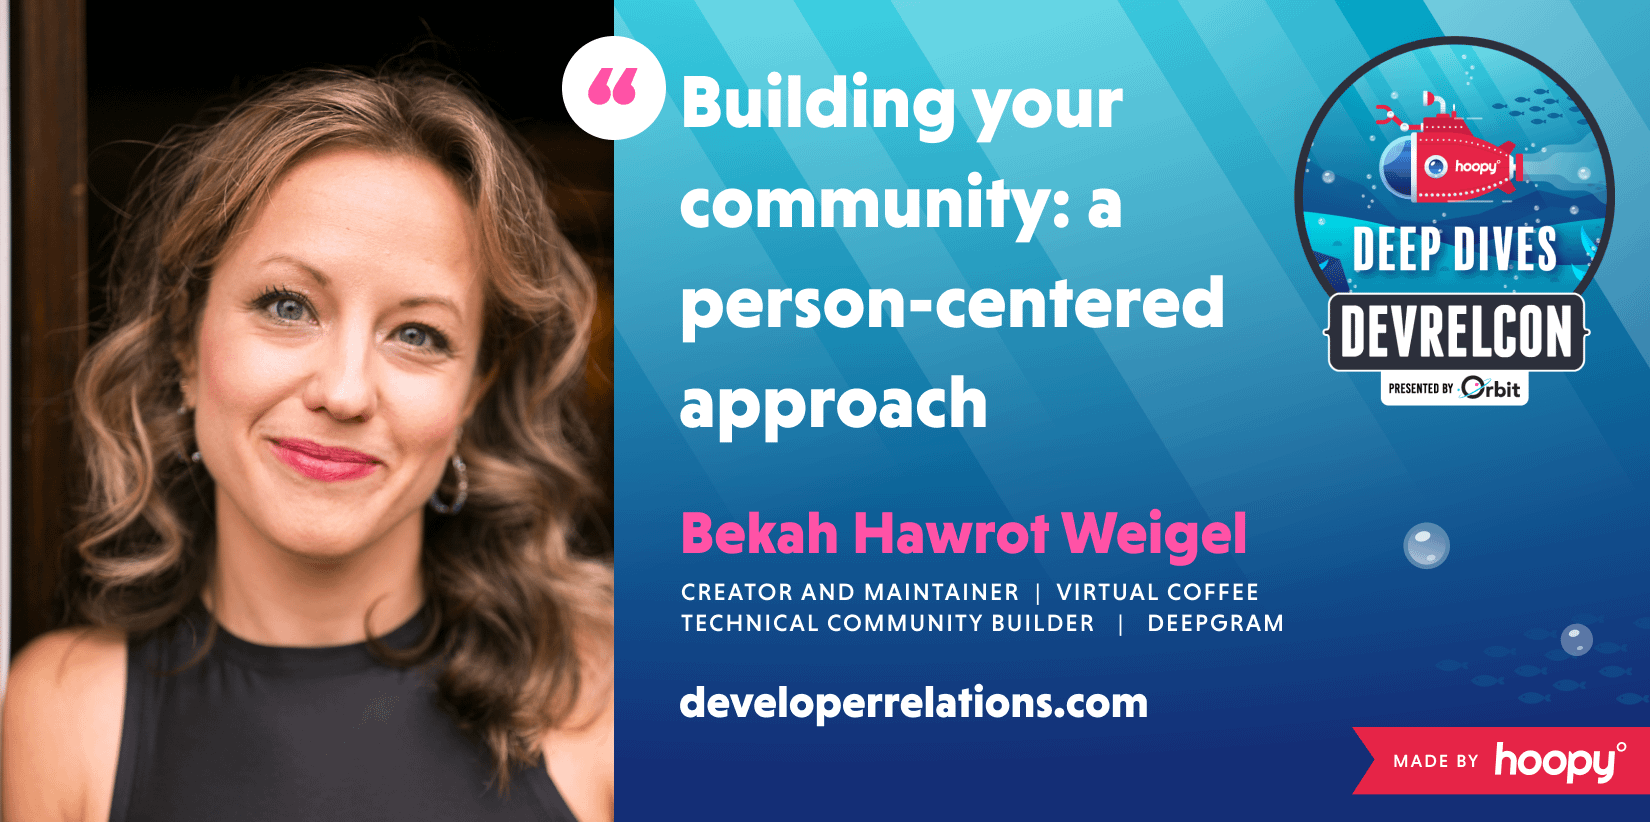 Building your community: a person centered approach